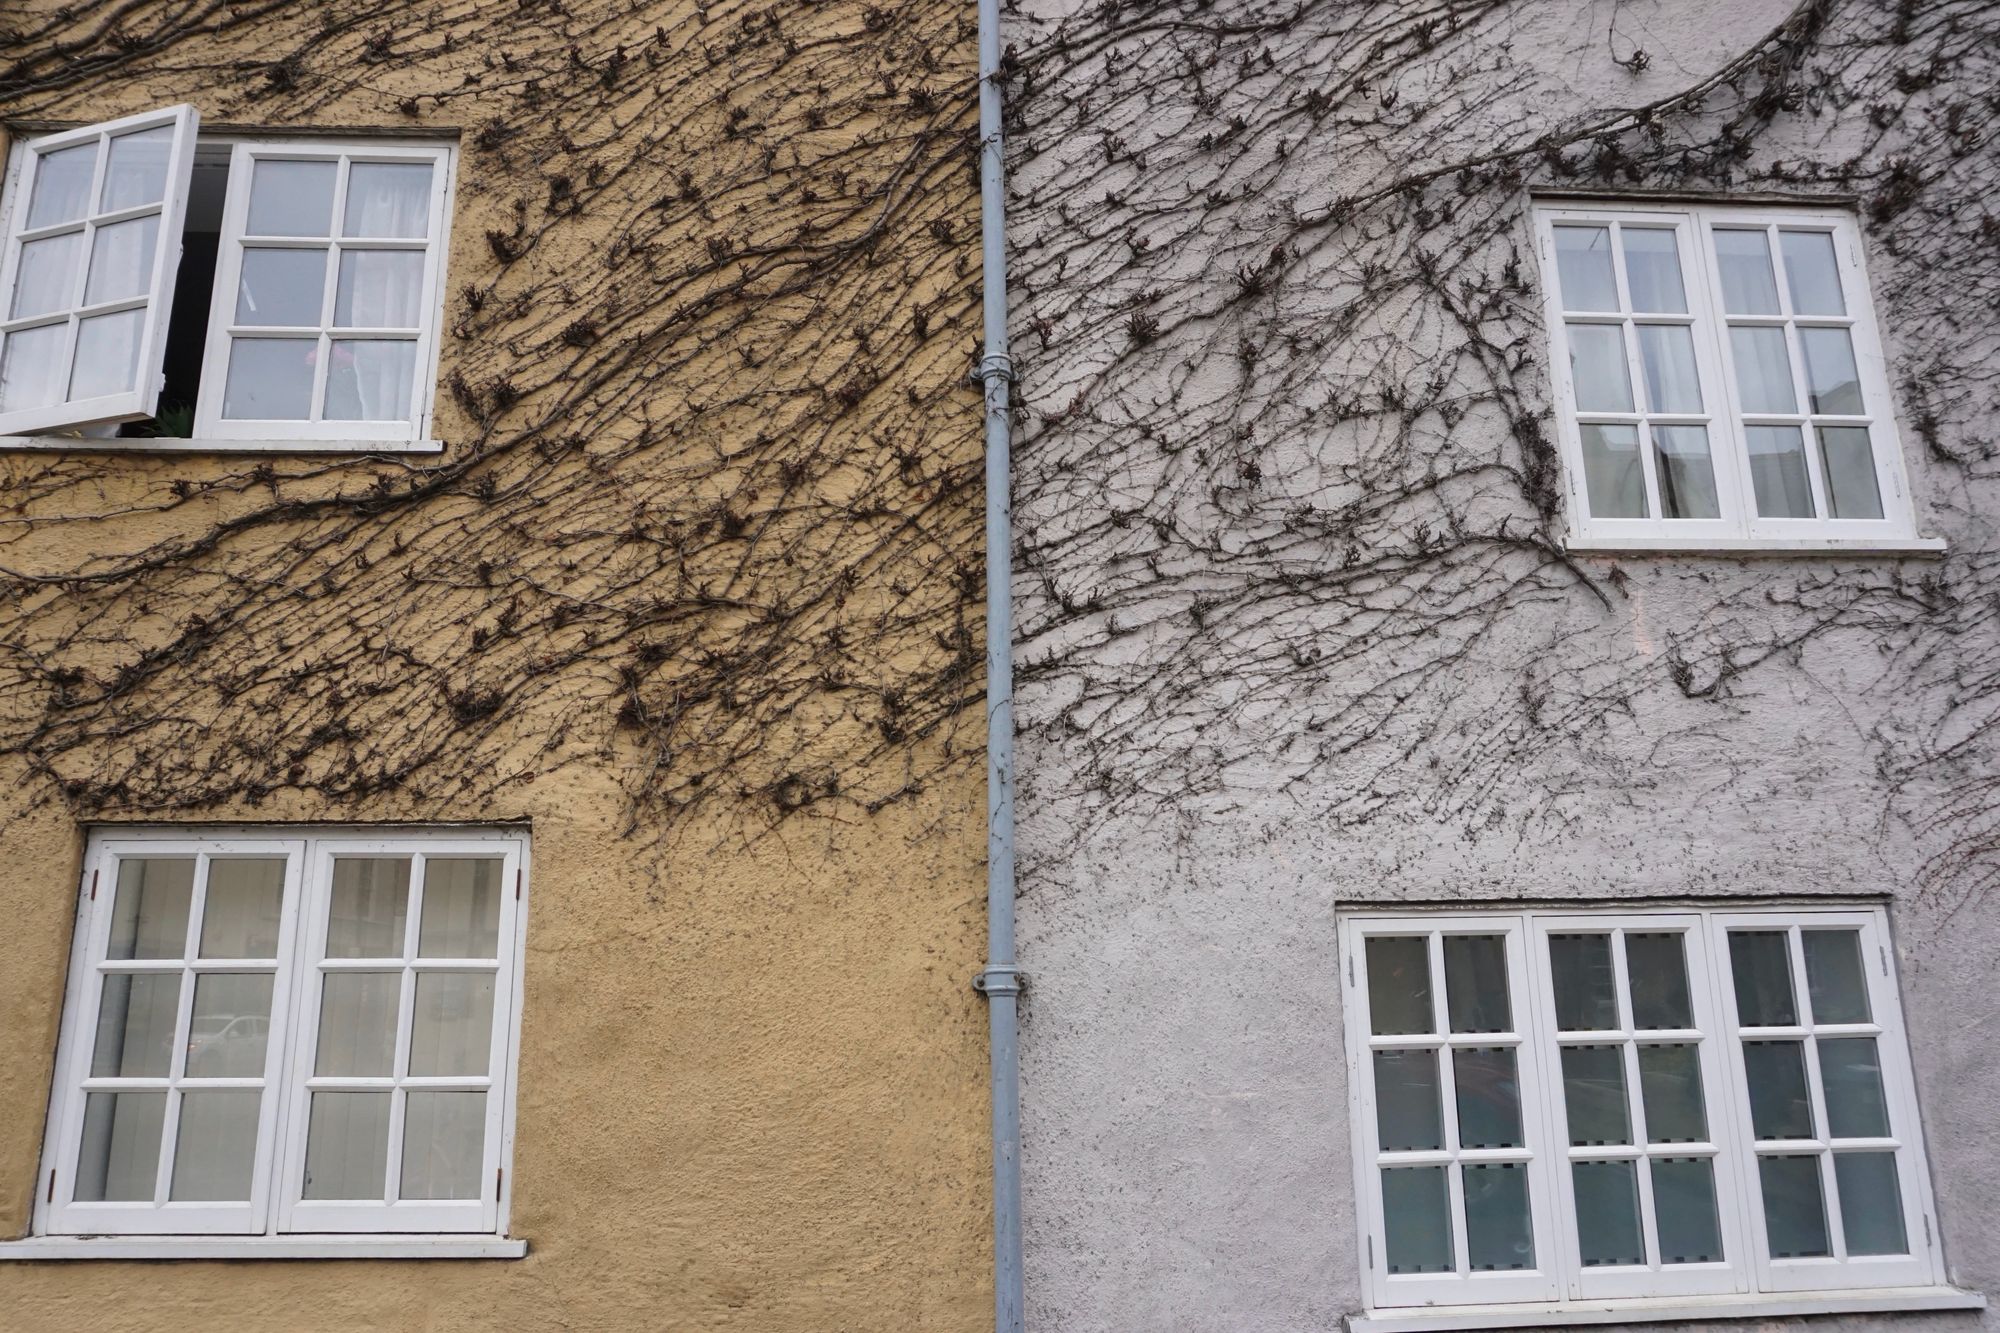 A terraced house with the left side having sand-coloured rendering, the right having grey coloured rendering, and a drainpipe down the middle. A bare creeping plant covers the wall.